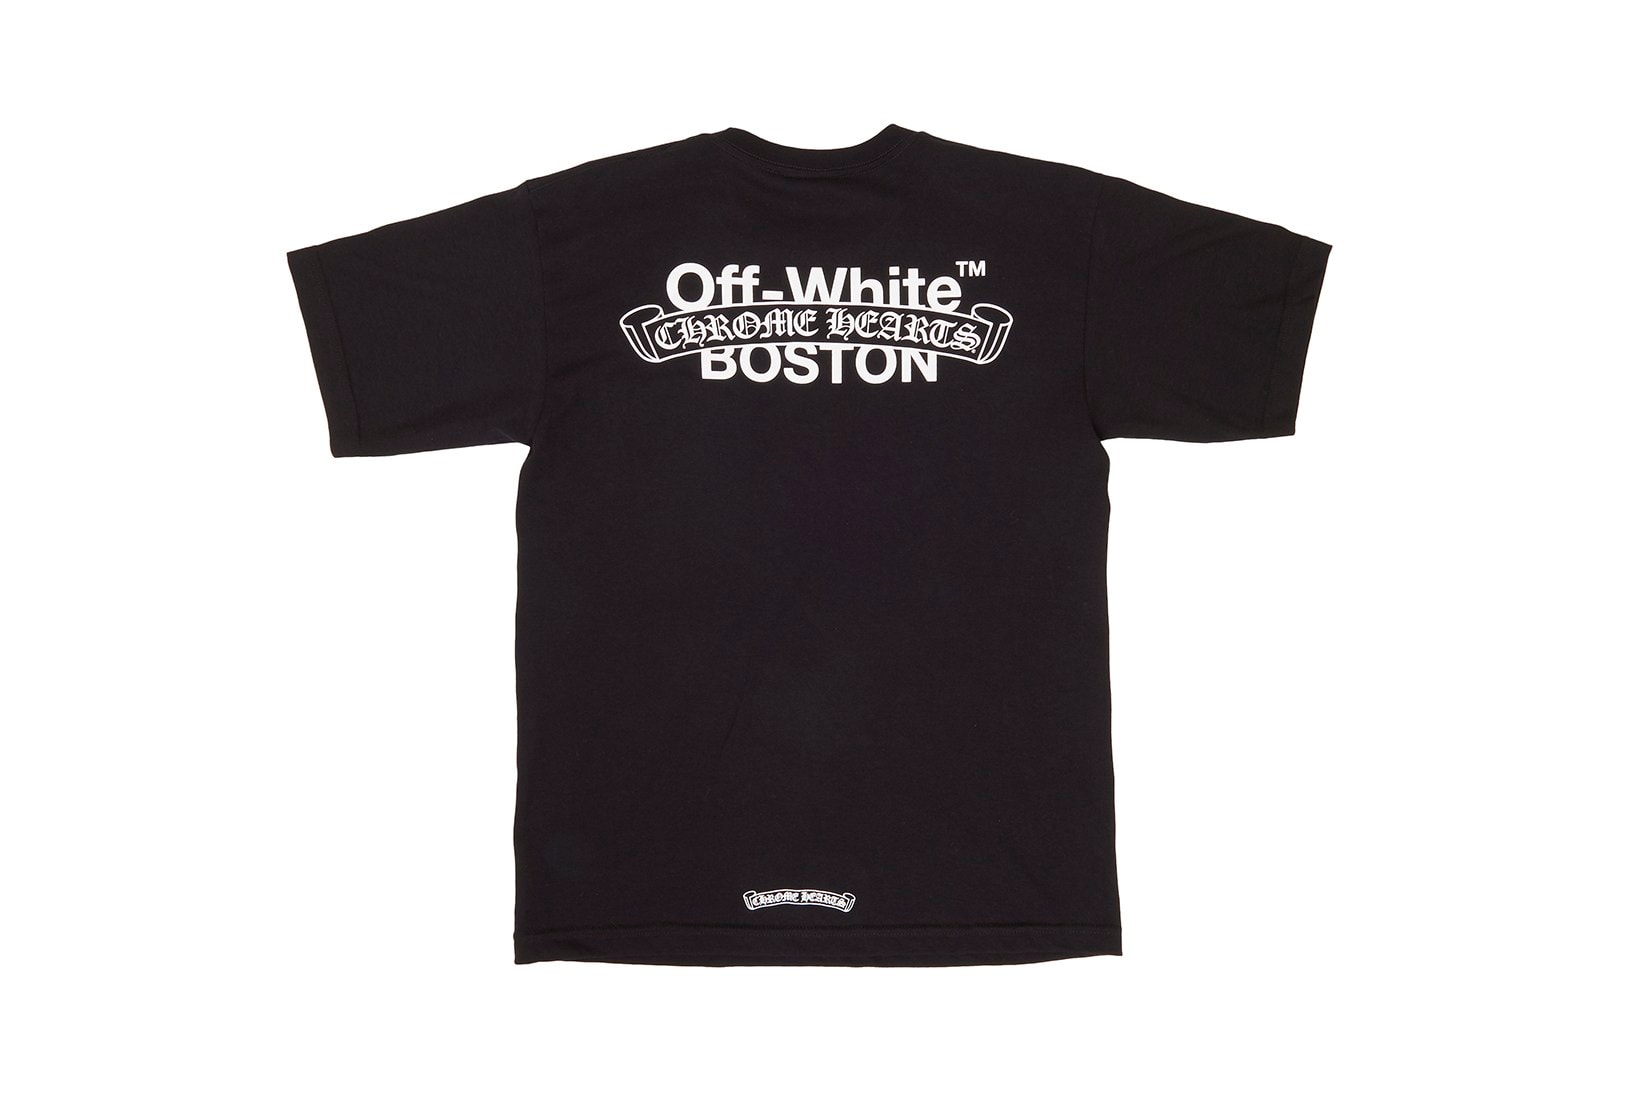 OFF-WHITE x Chrome Hearts Limited Edition T-Shirts